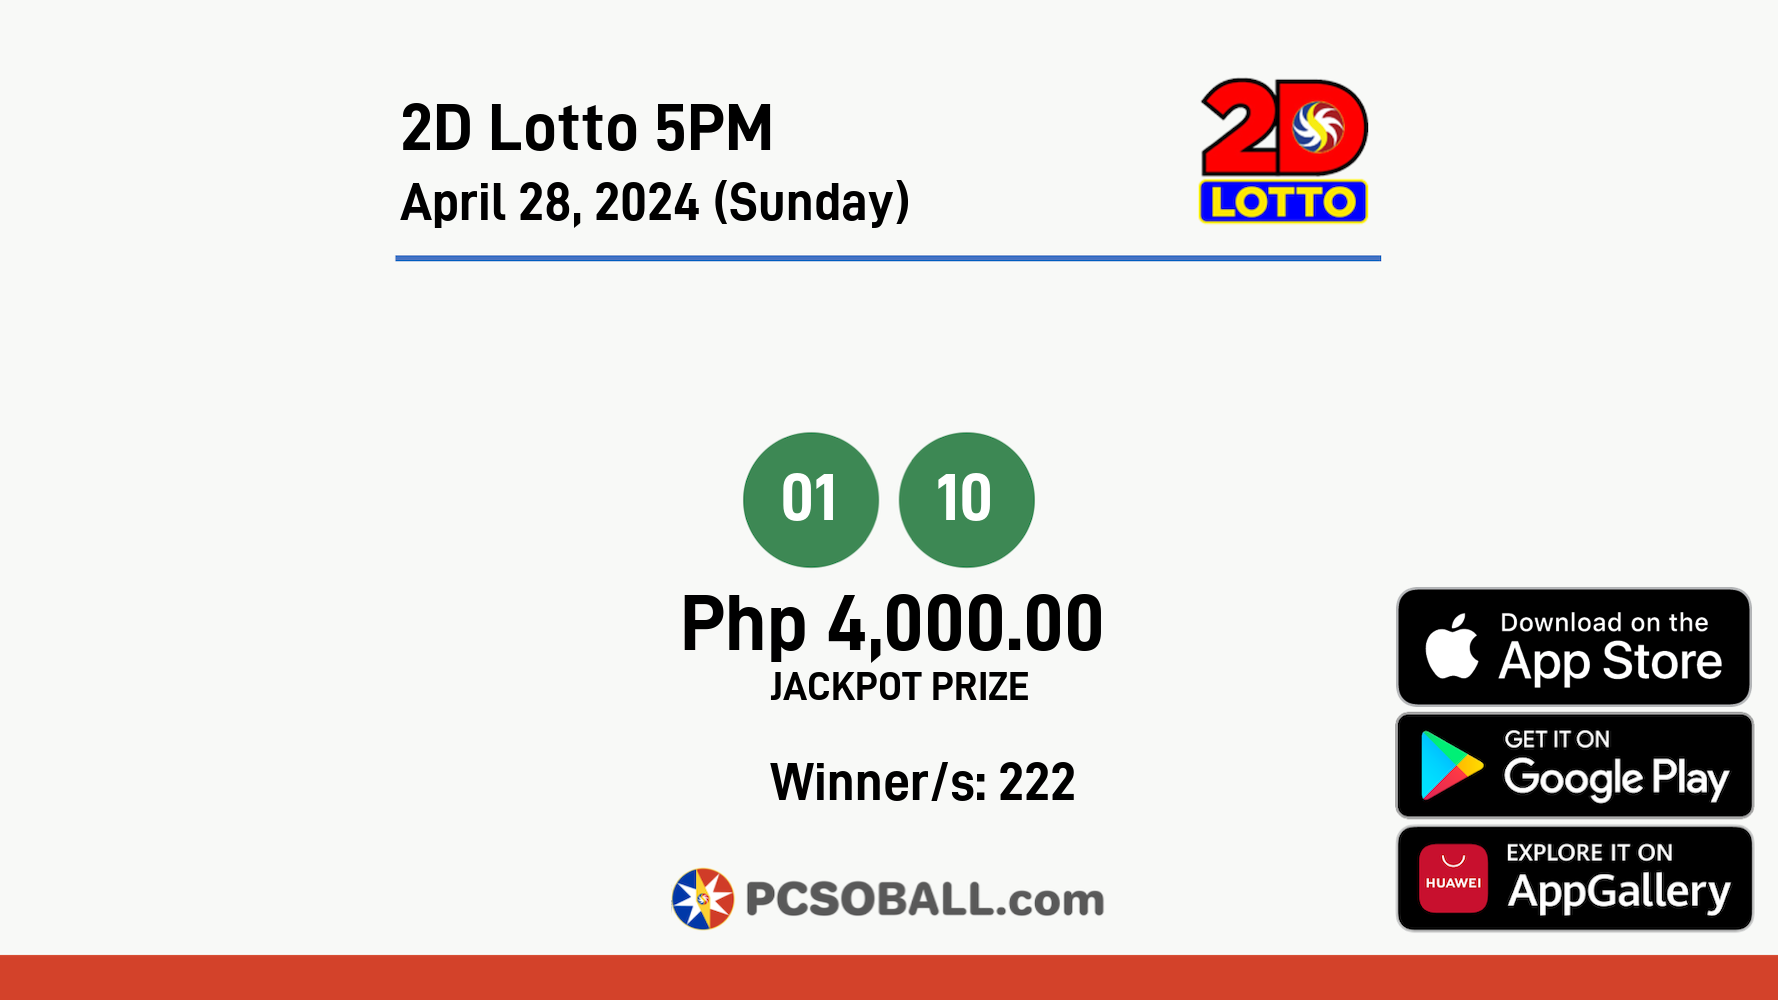 2D Lotto 5PM April 28, 2024 (Sunday) Result